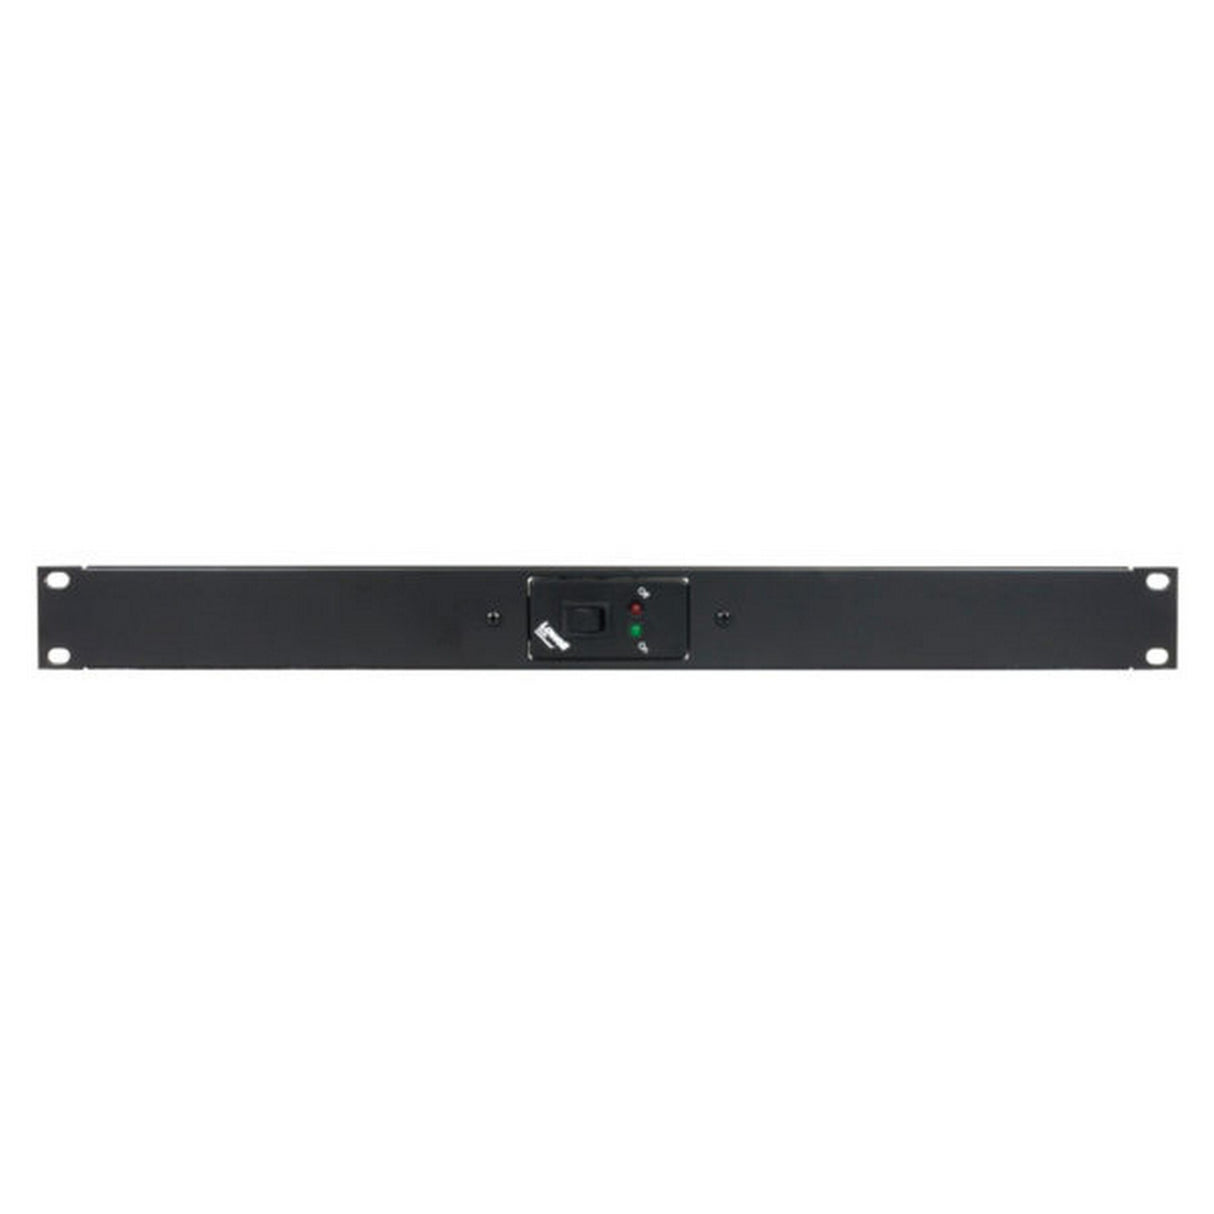 Lowell RPSB2-MR-RJ Momentary Single Pole Single Throw Low-Voltage Rackmount Switch with RJ45 Connector